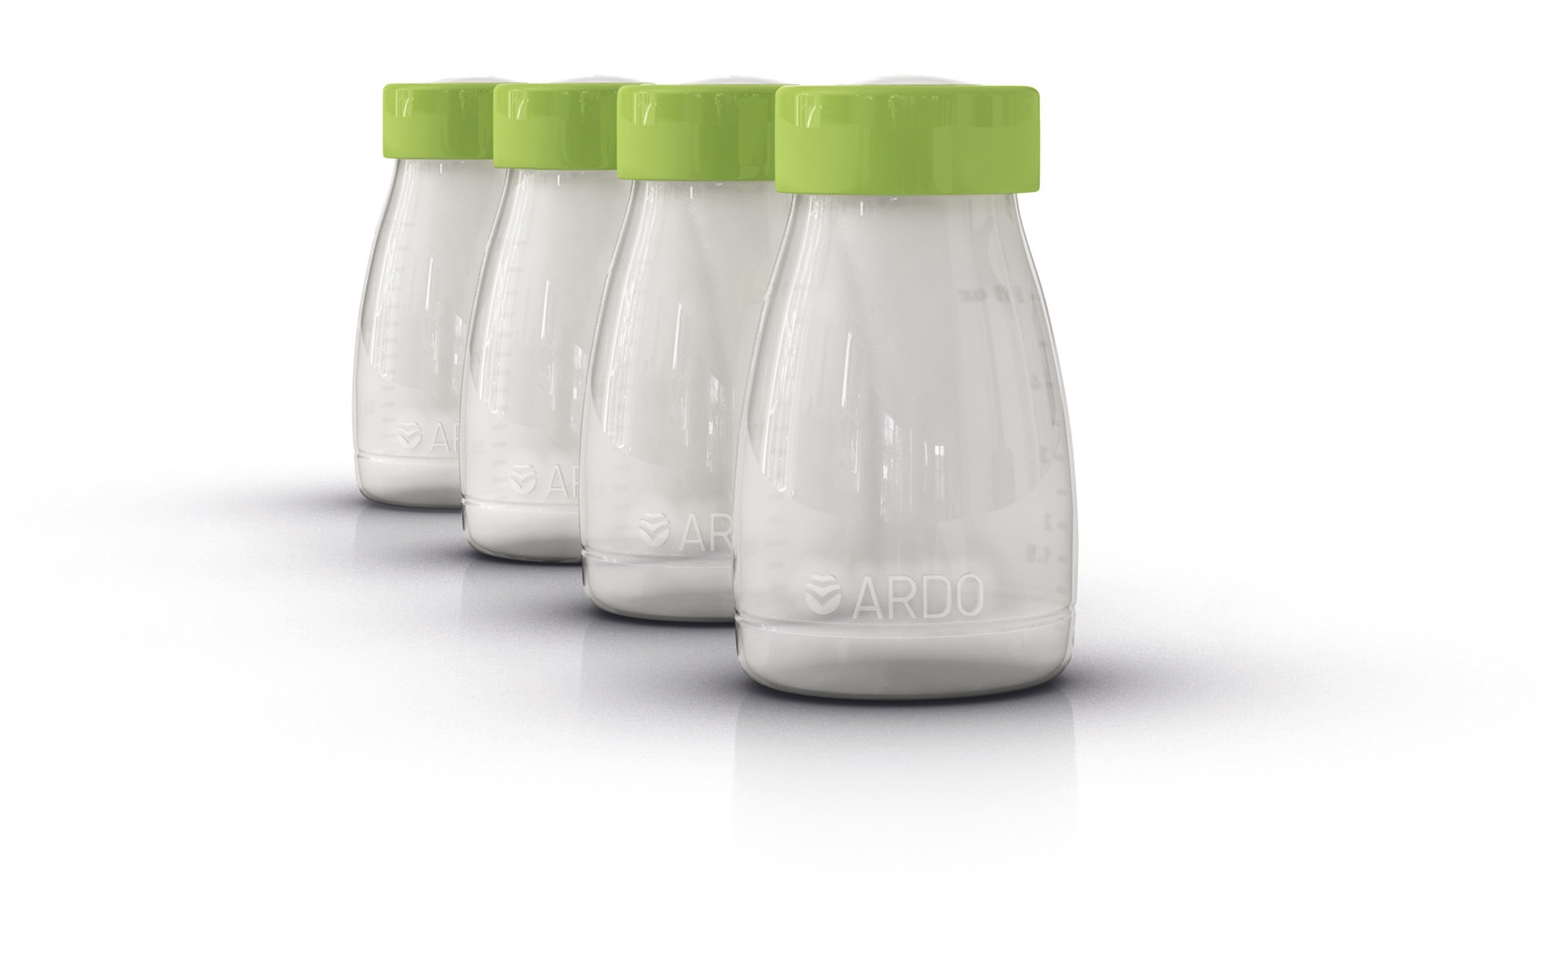 4 Breast Milk Storage and Feeding Bottles - save your milk with